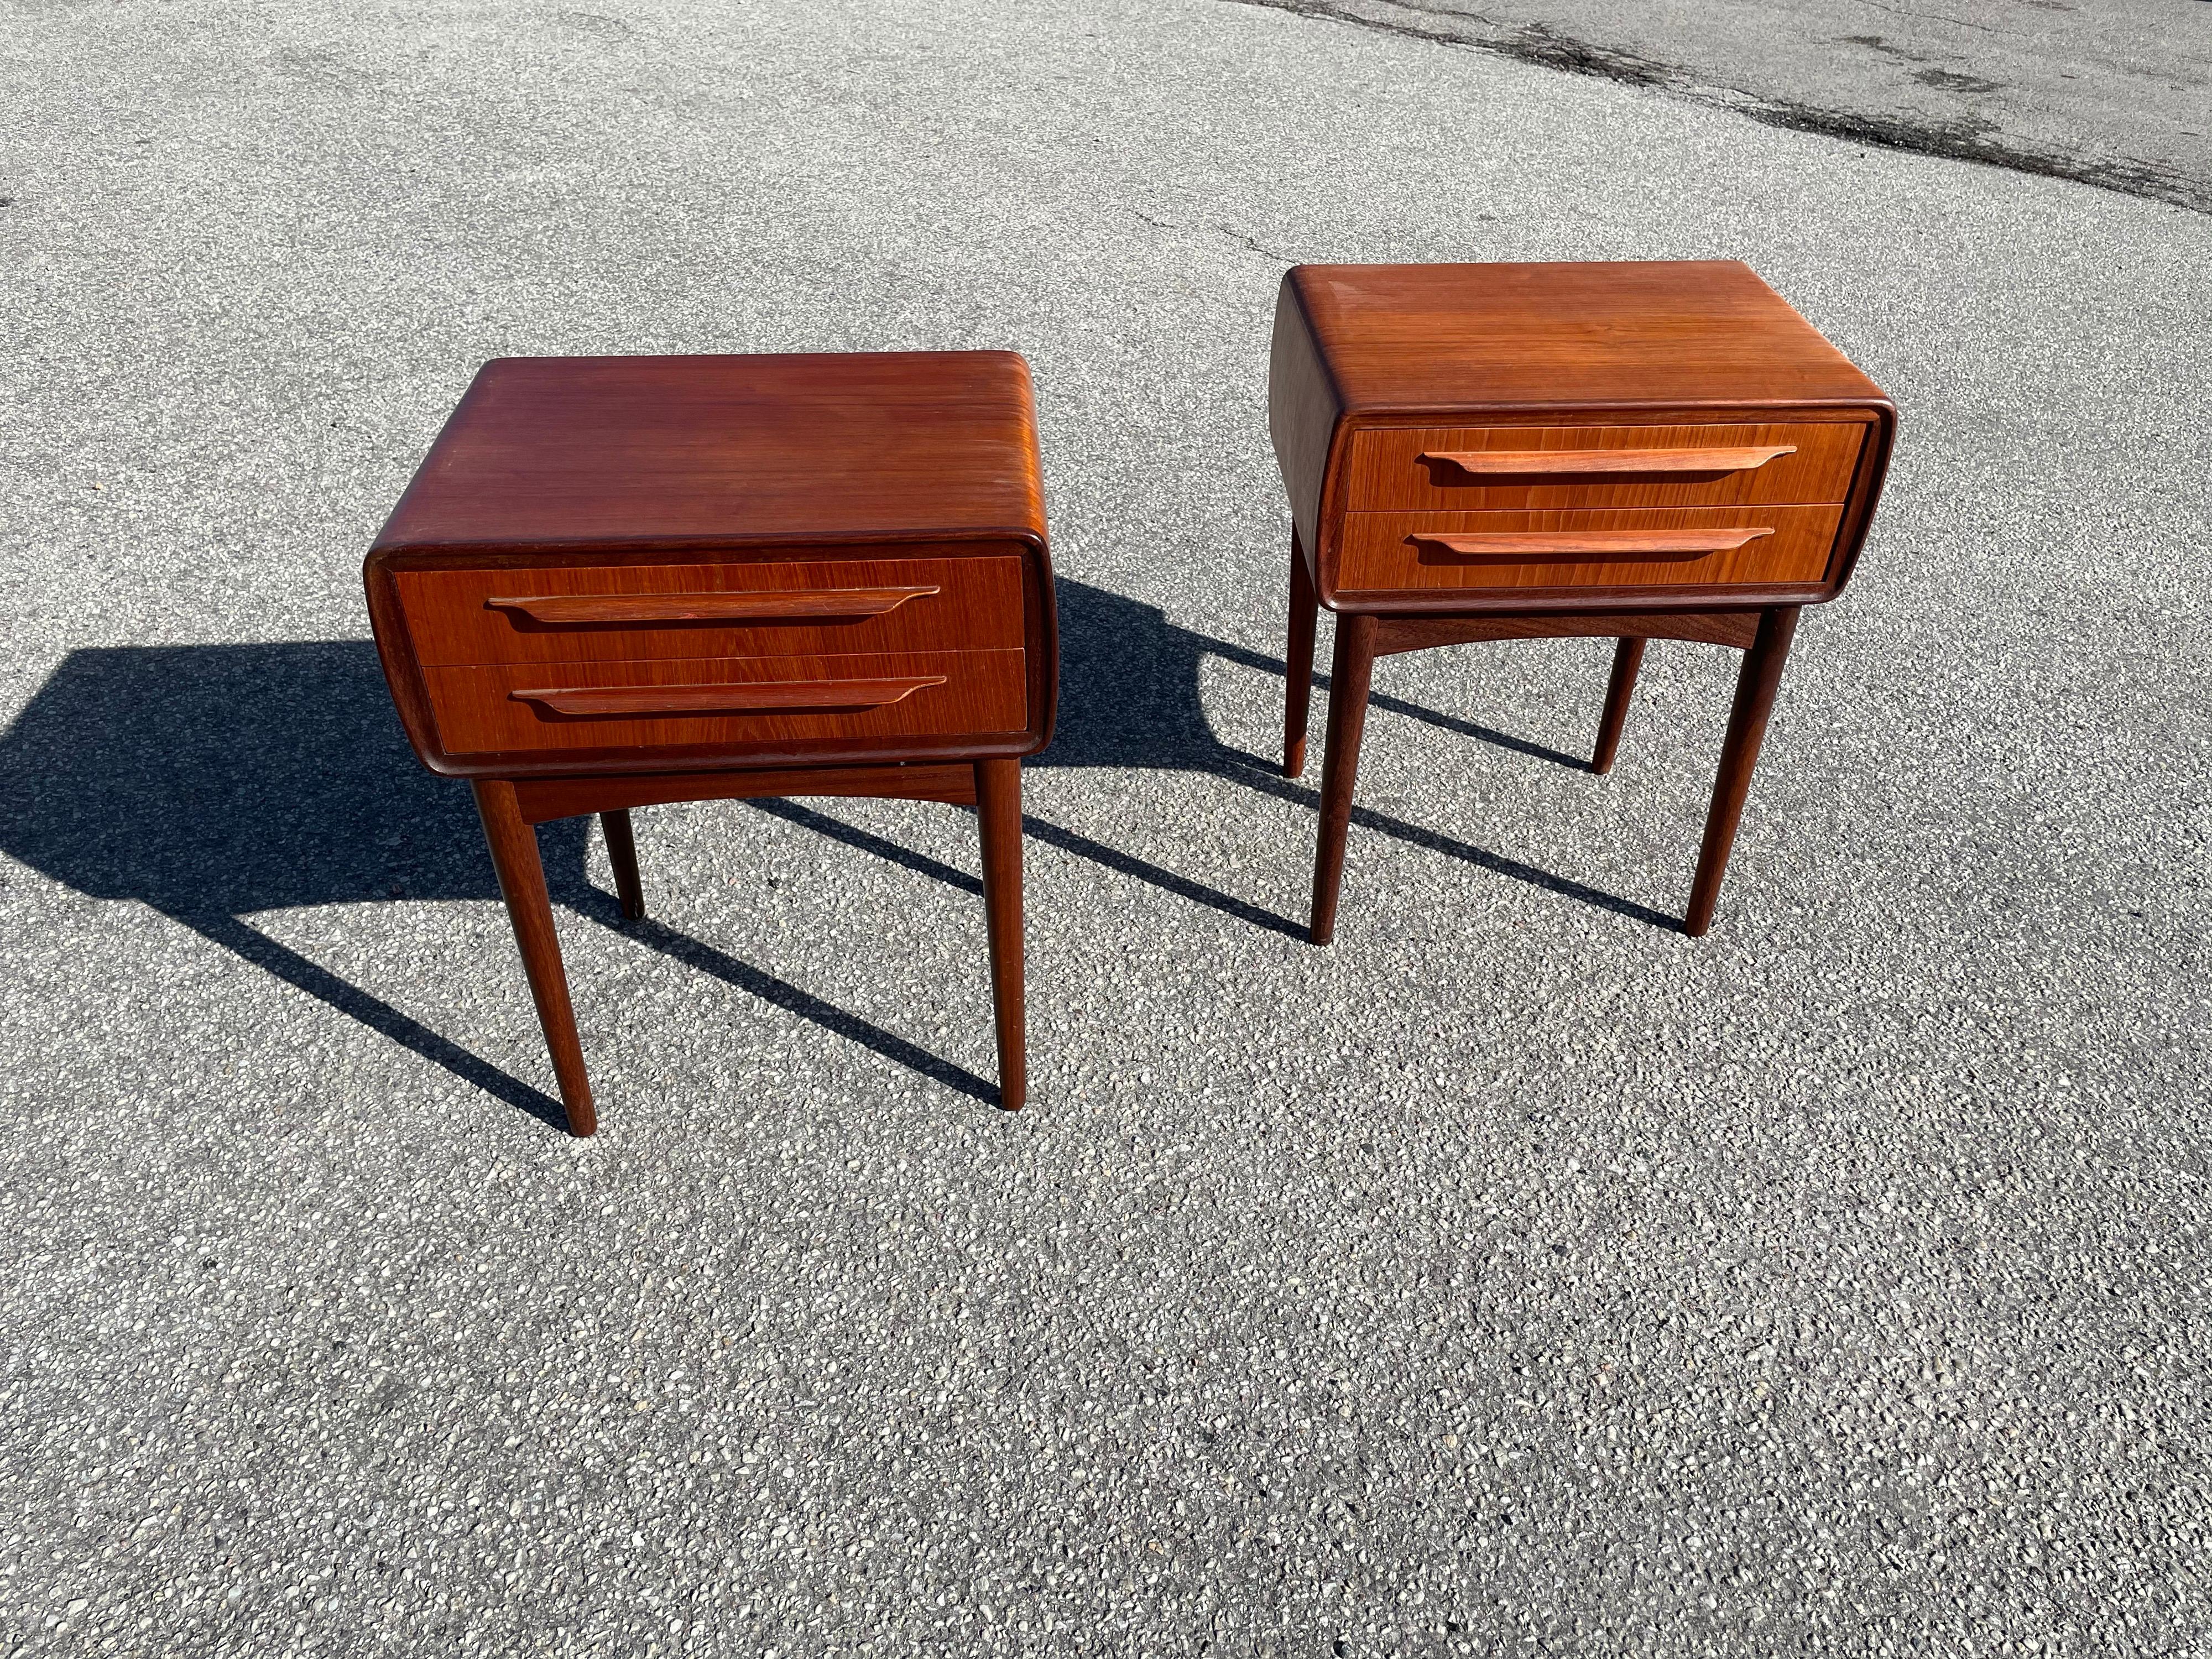 Pair of nightstands in teak, designed by Johannes Andersen and made by CFC furniture, Denmark in the 1960s. Great original condition bedside tables.
        